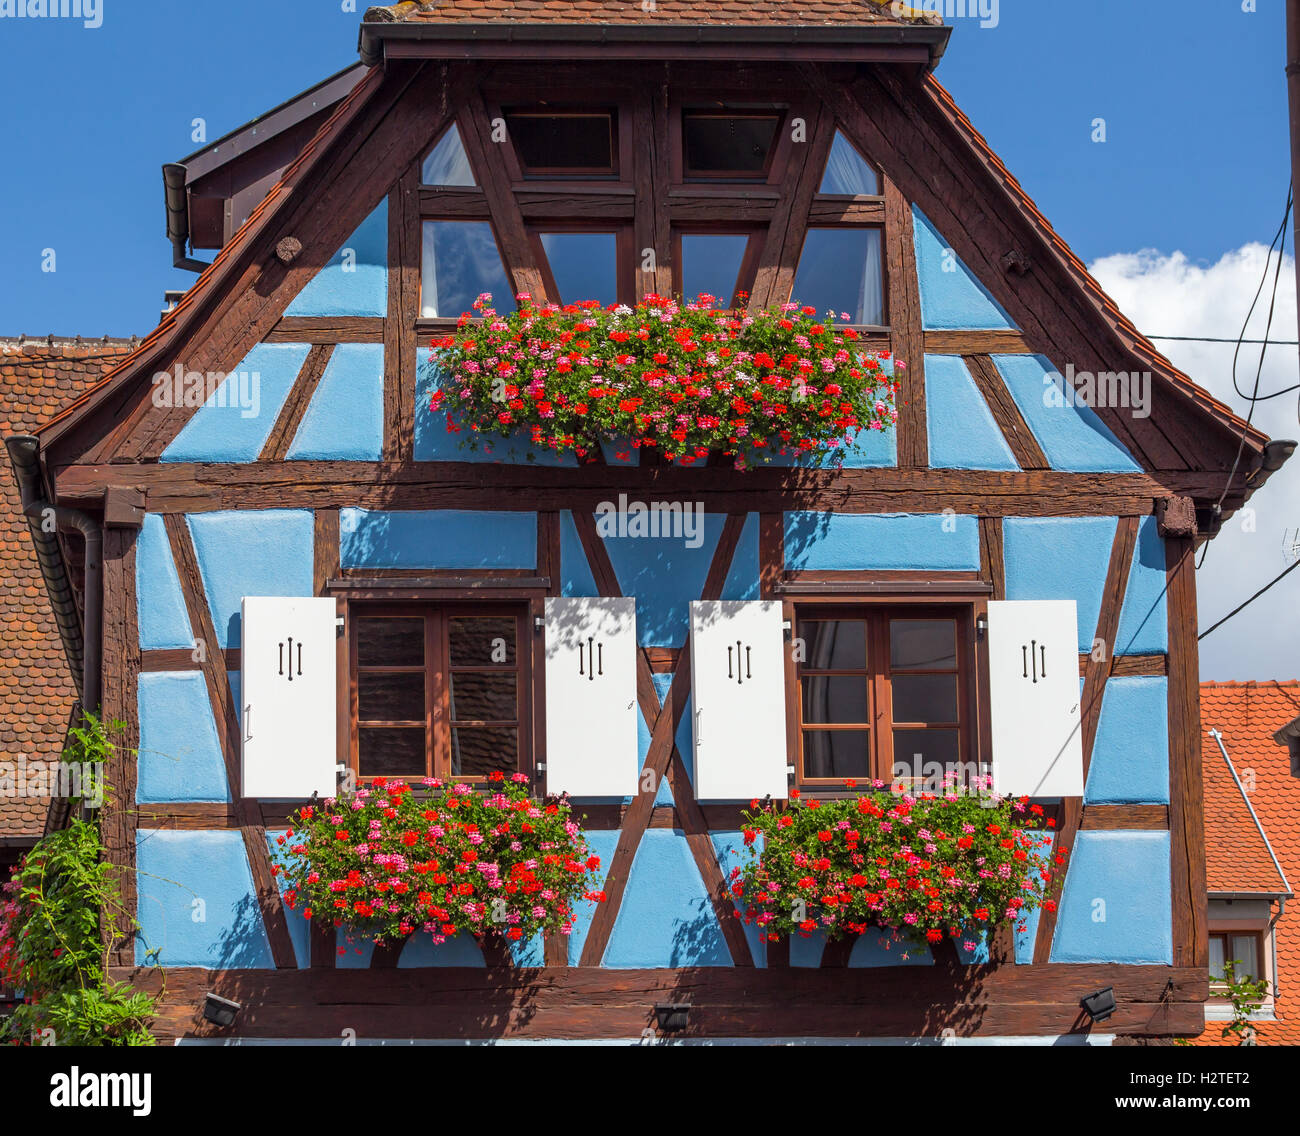 Traditional half-timbered house in Eguisheim, Alsace, France Stock Photo